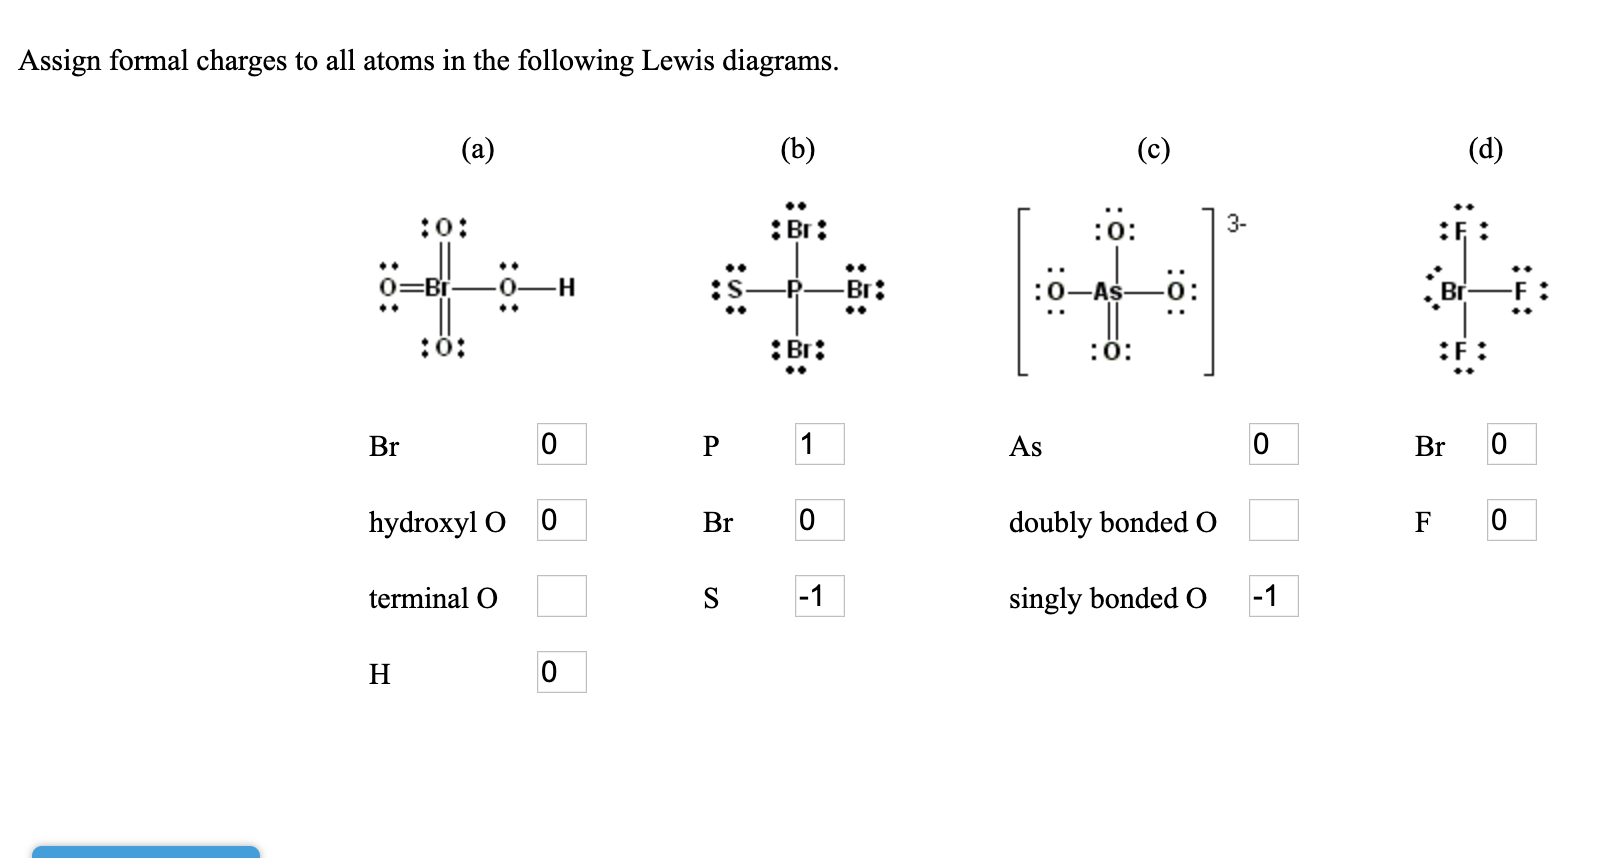 Assign formal charges to all atoms in the following Lewis diagrams.
(a)
(b)
(c)
(d)
..
:0:
:Br:
:0:
3-
..
0=Br
-H
-Br:
Br
:ö:
:Br:
:0:
:F:
Br
As
Br
hydroxyl O 0
Br
doubly bonded o
F
terminal O
-1
singly bonded 0
-1
Н
:ö:
